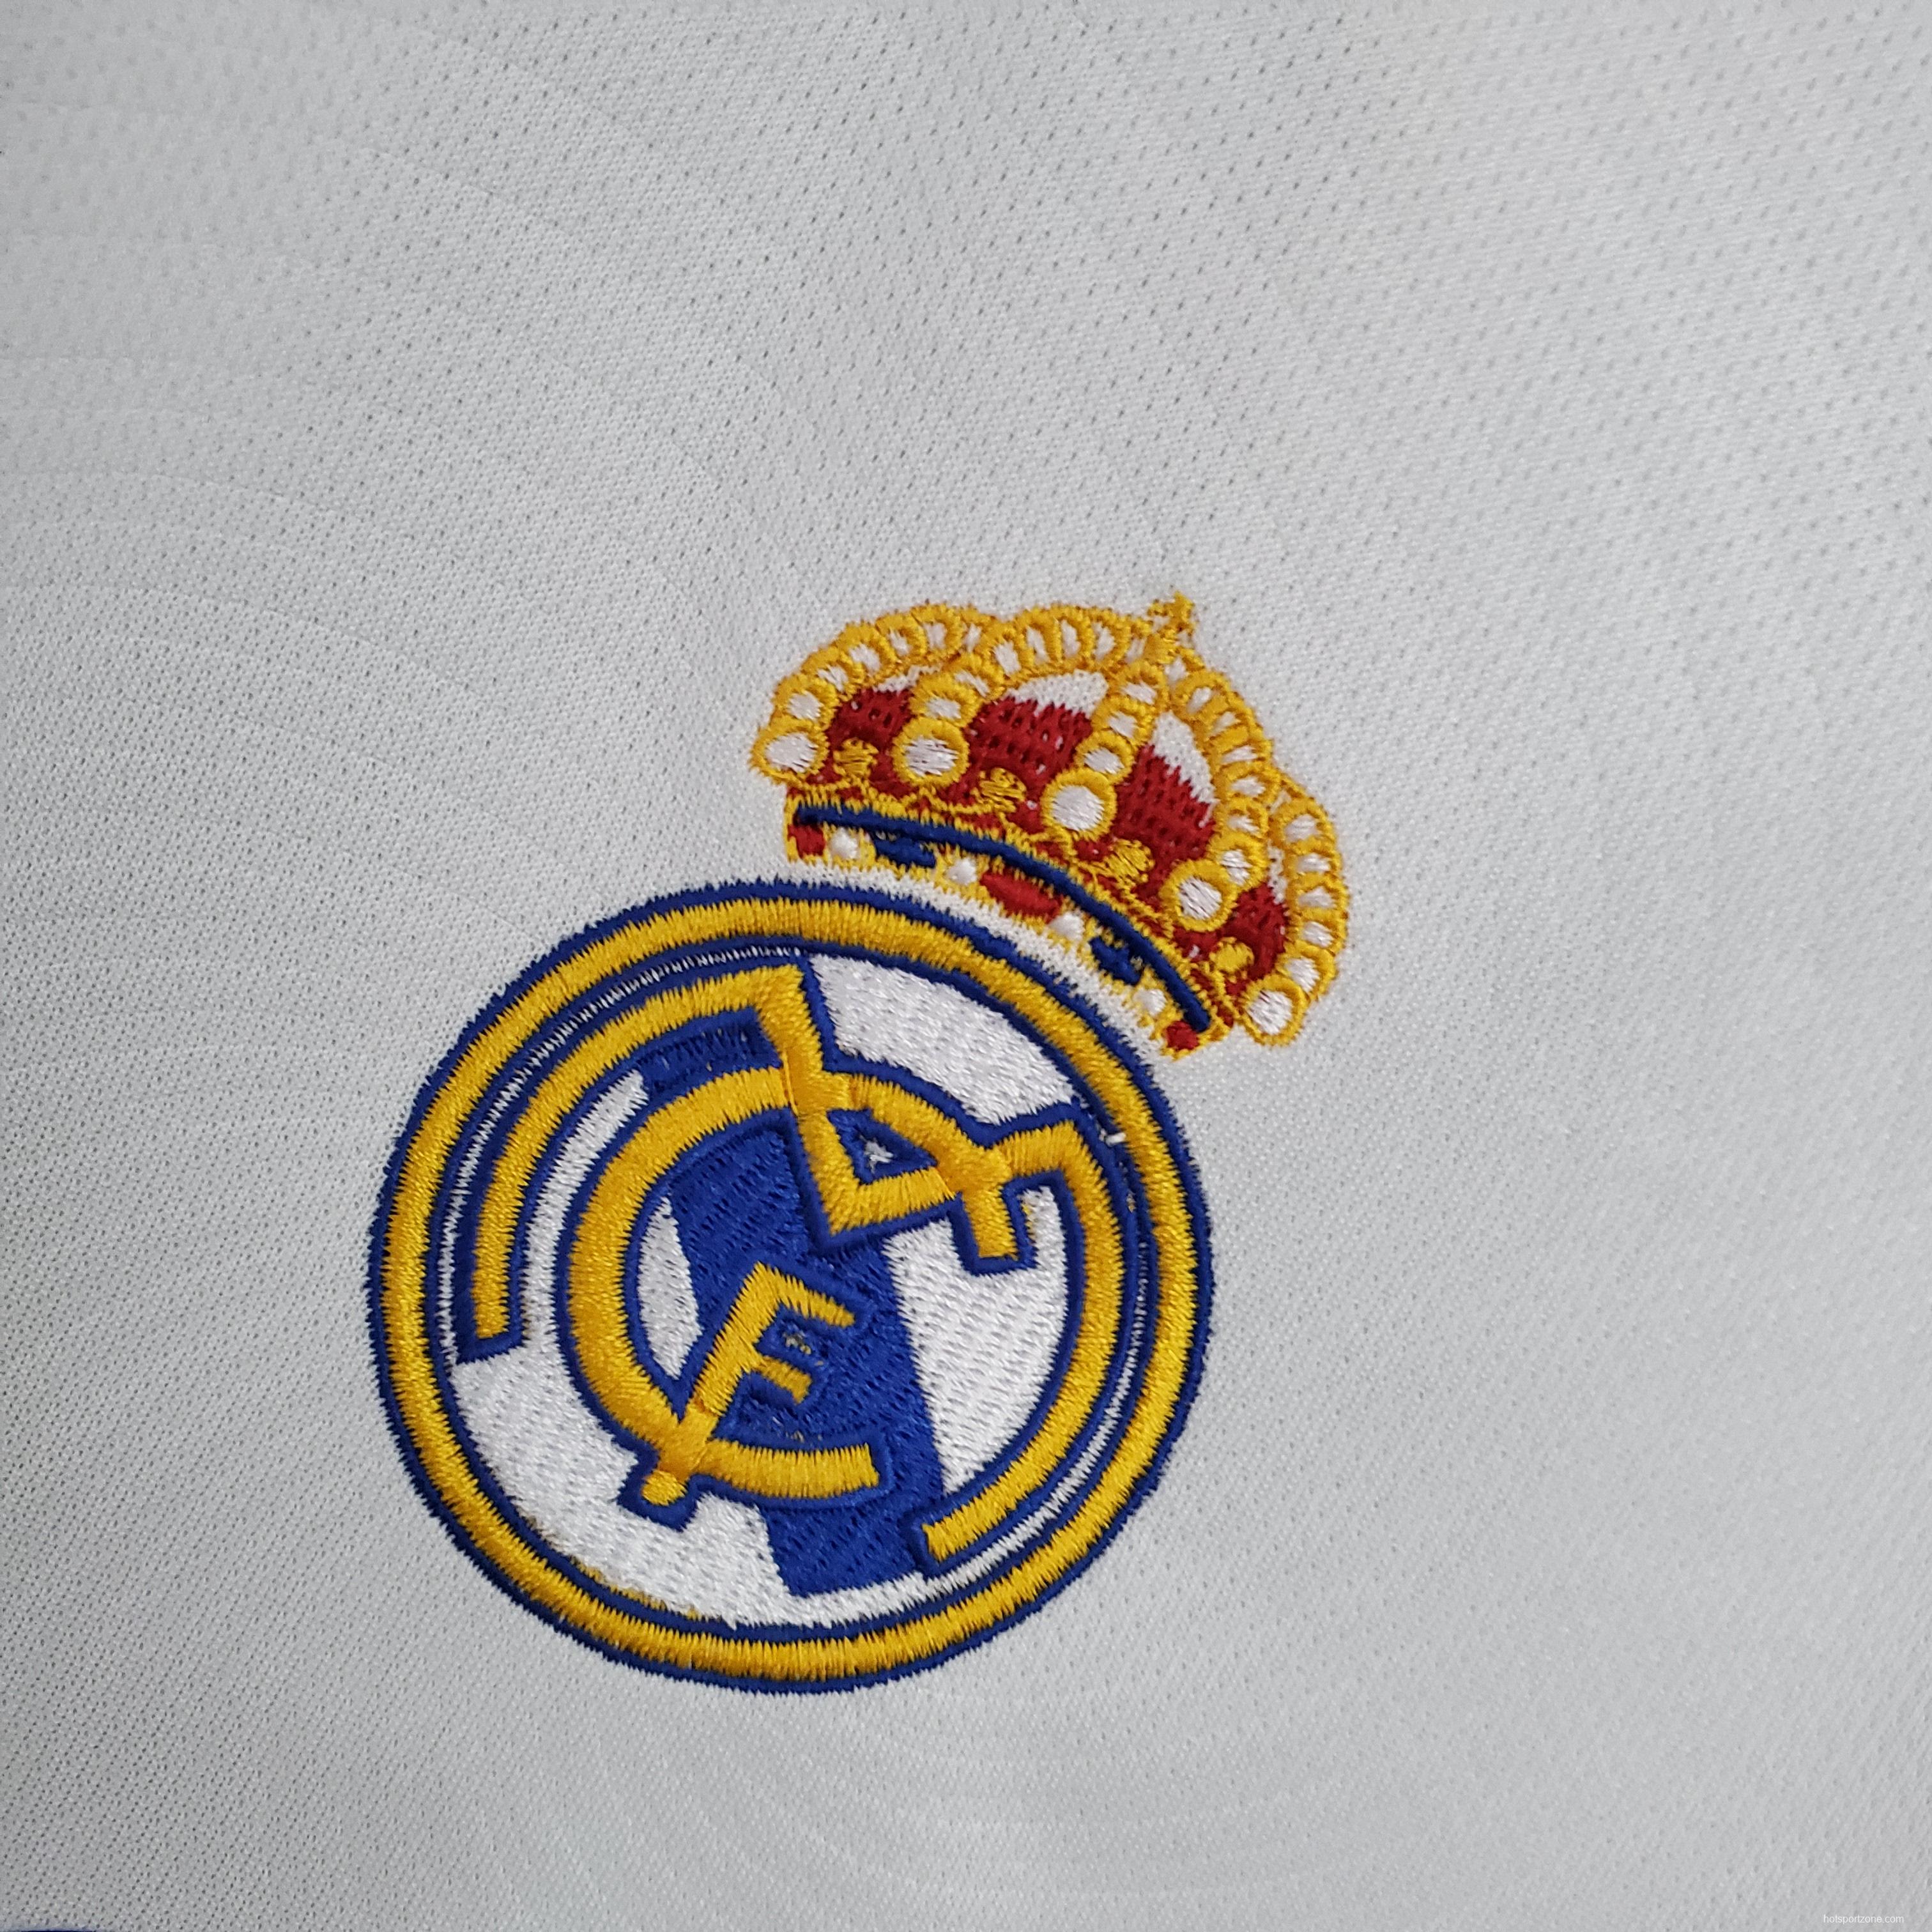 21/22 Real Madrid home Soccer Jersey